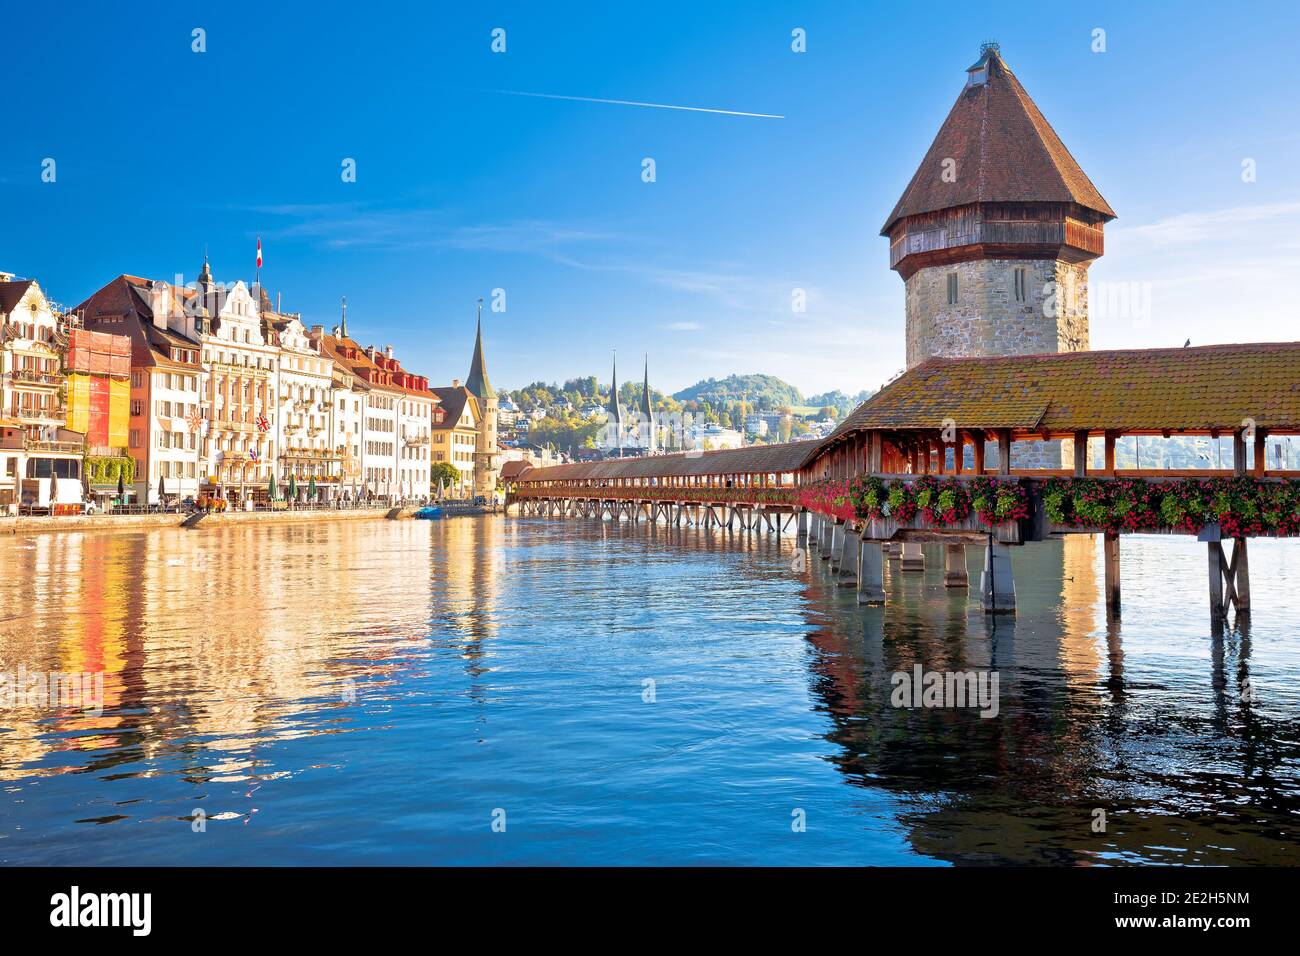 Luzern wooden Chapel Bridge and tower panoramic view, landmark in town in central Switzerland Stock Photo